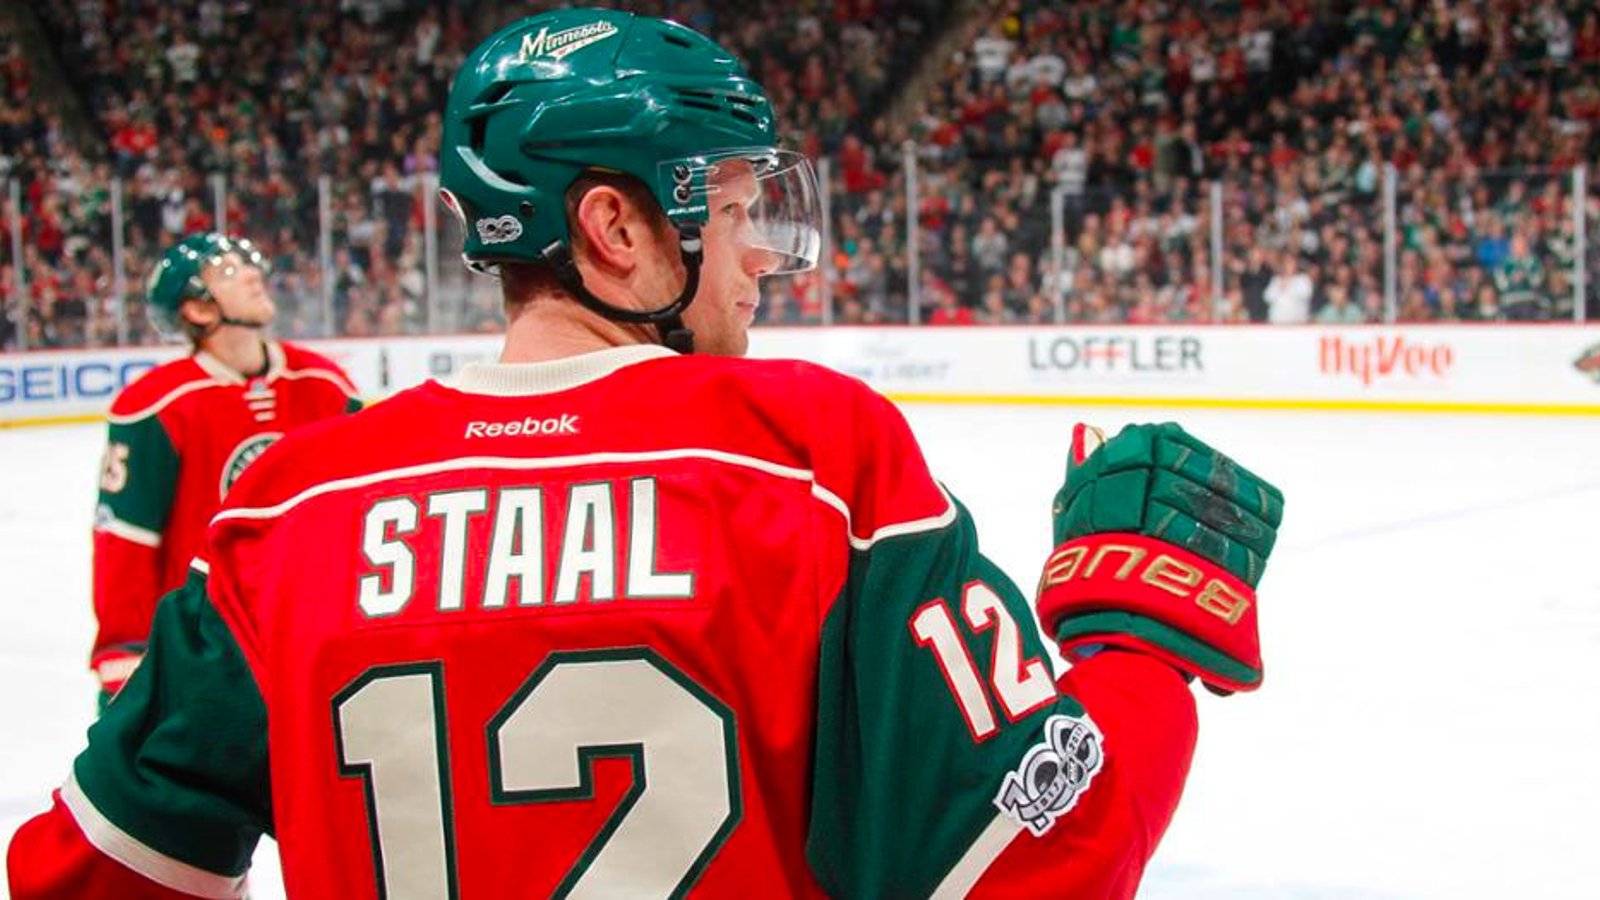 Eric Staal signs professional tryout (PTO) contract